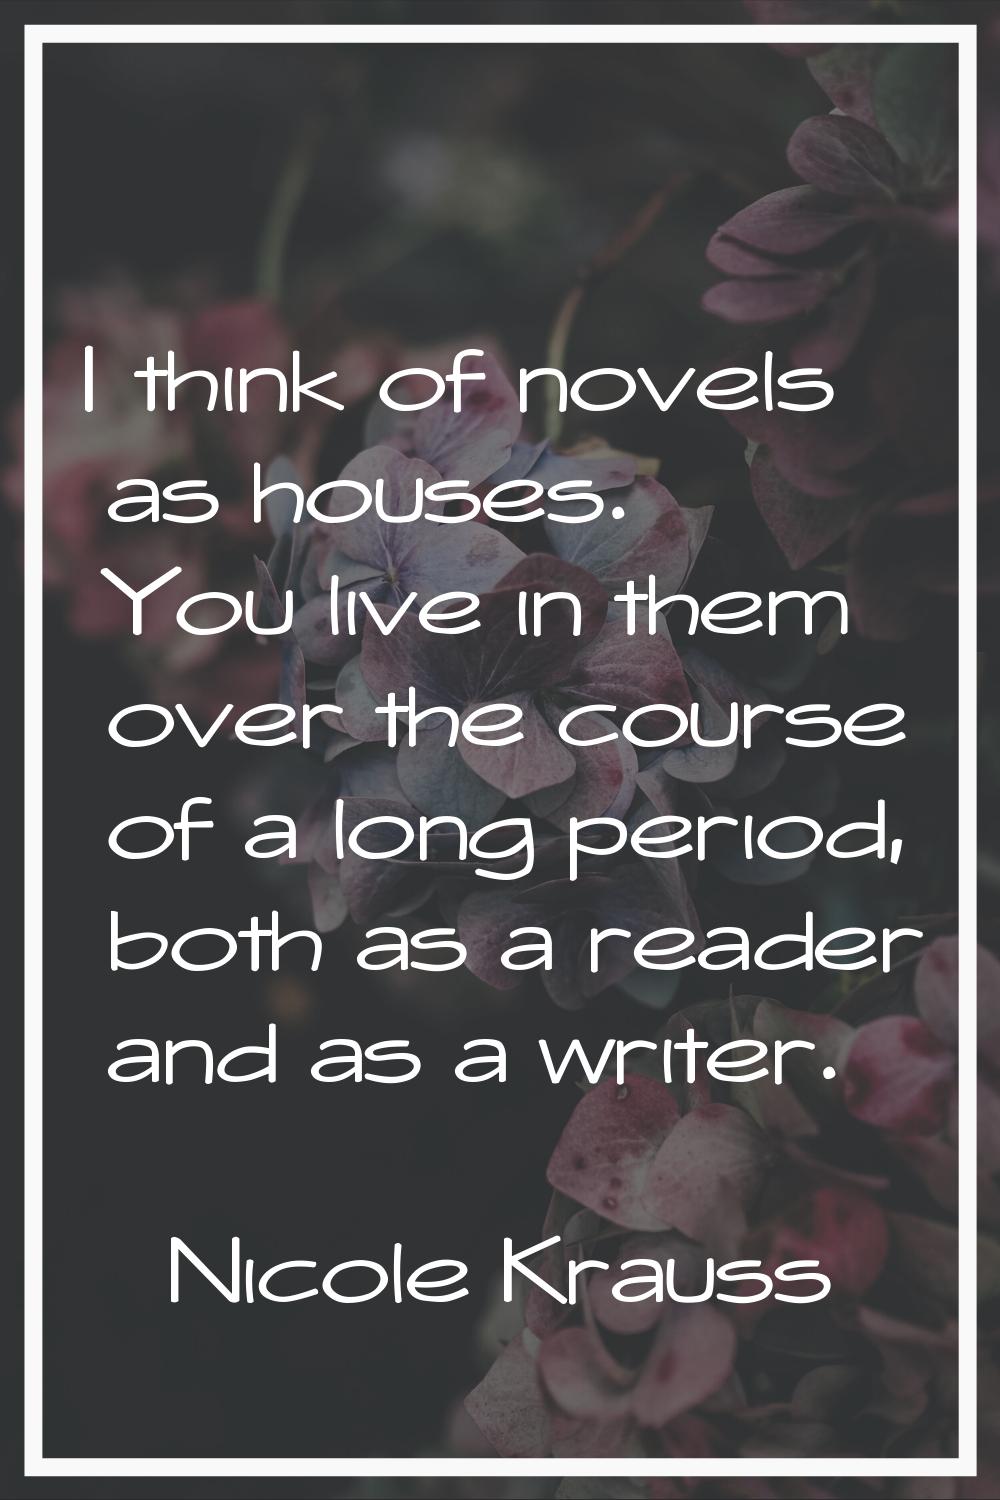 I think of novels as houses. You live in them over the course of a long period, both as a reader an